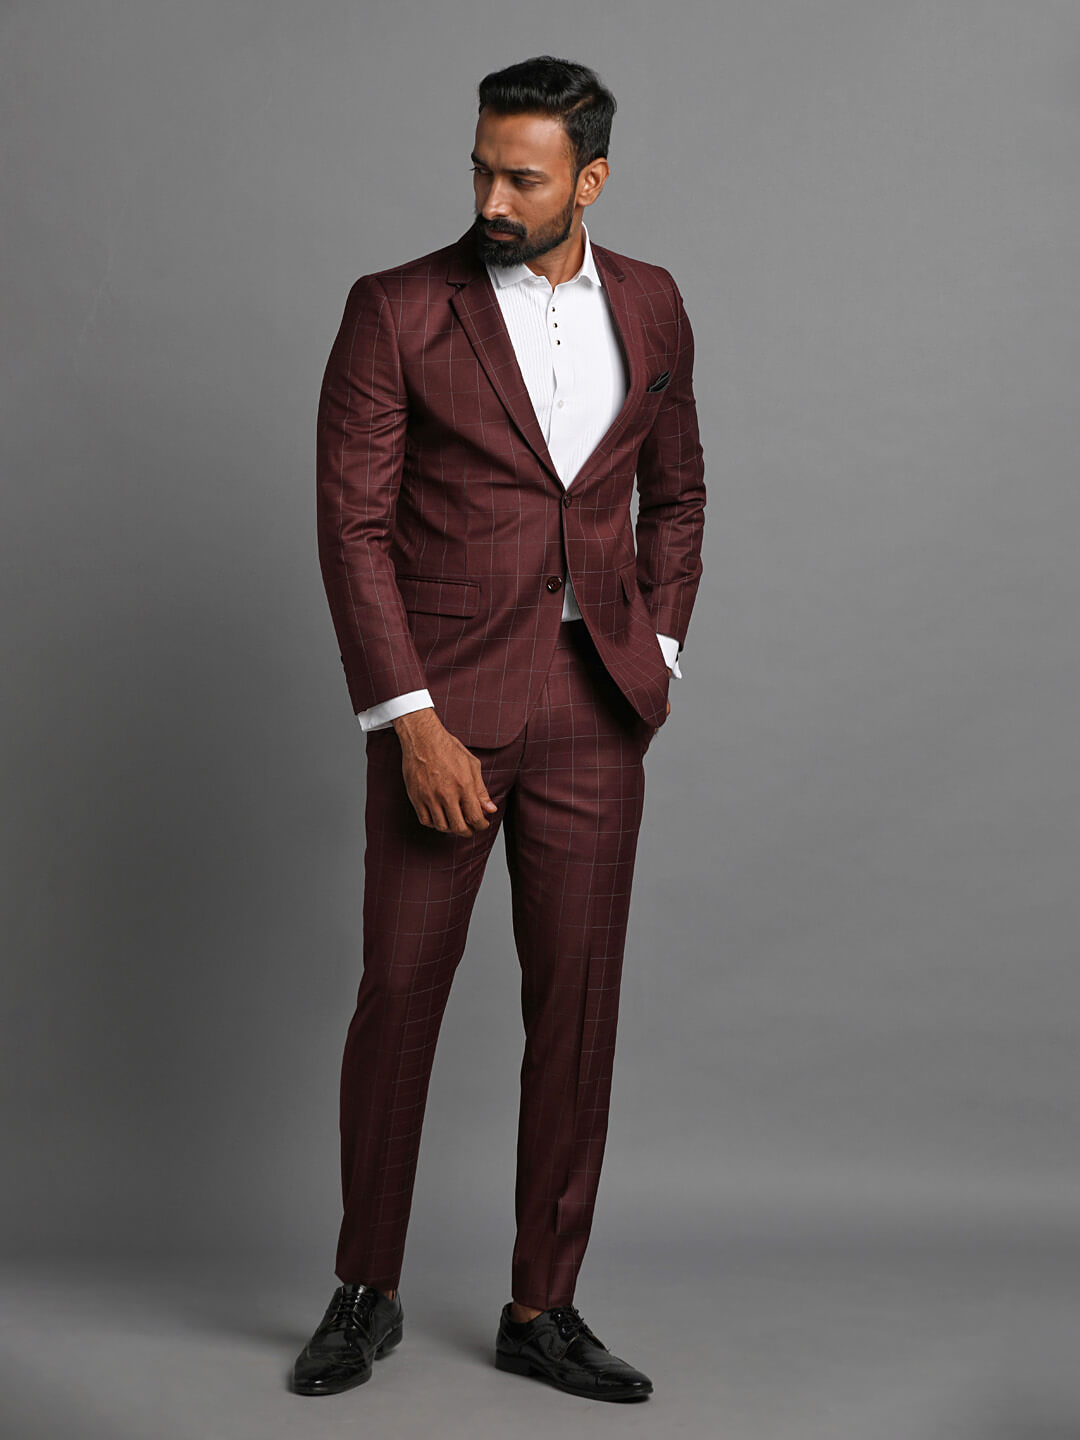 2-Piece Suit All Sizes Mens 2 Piece Suit at best price in Meerut